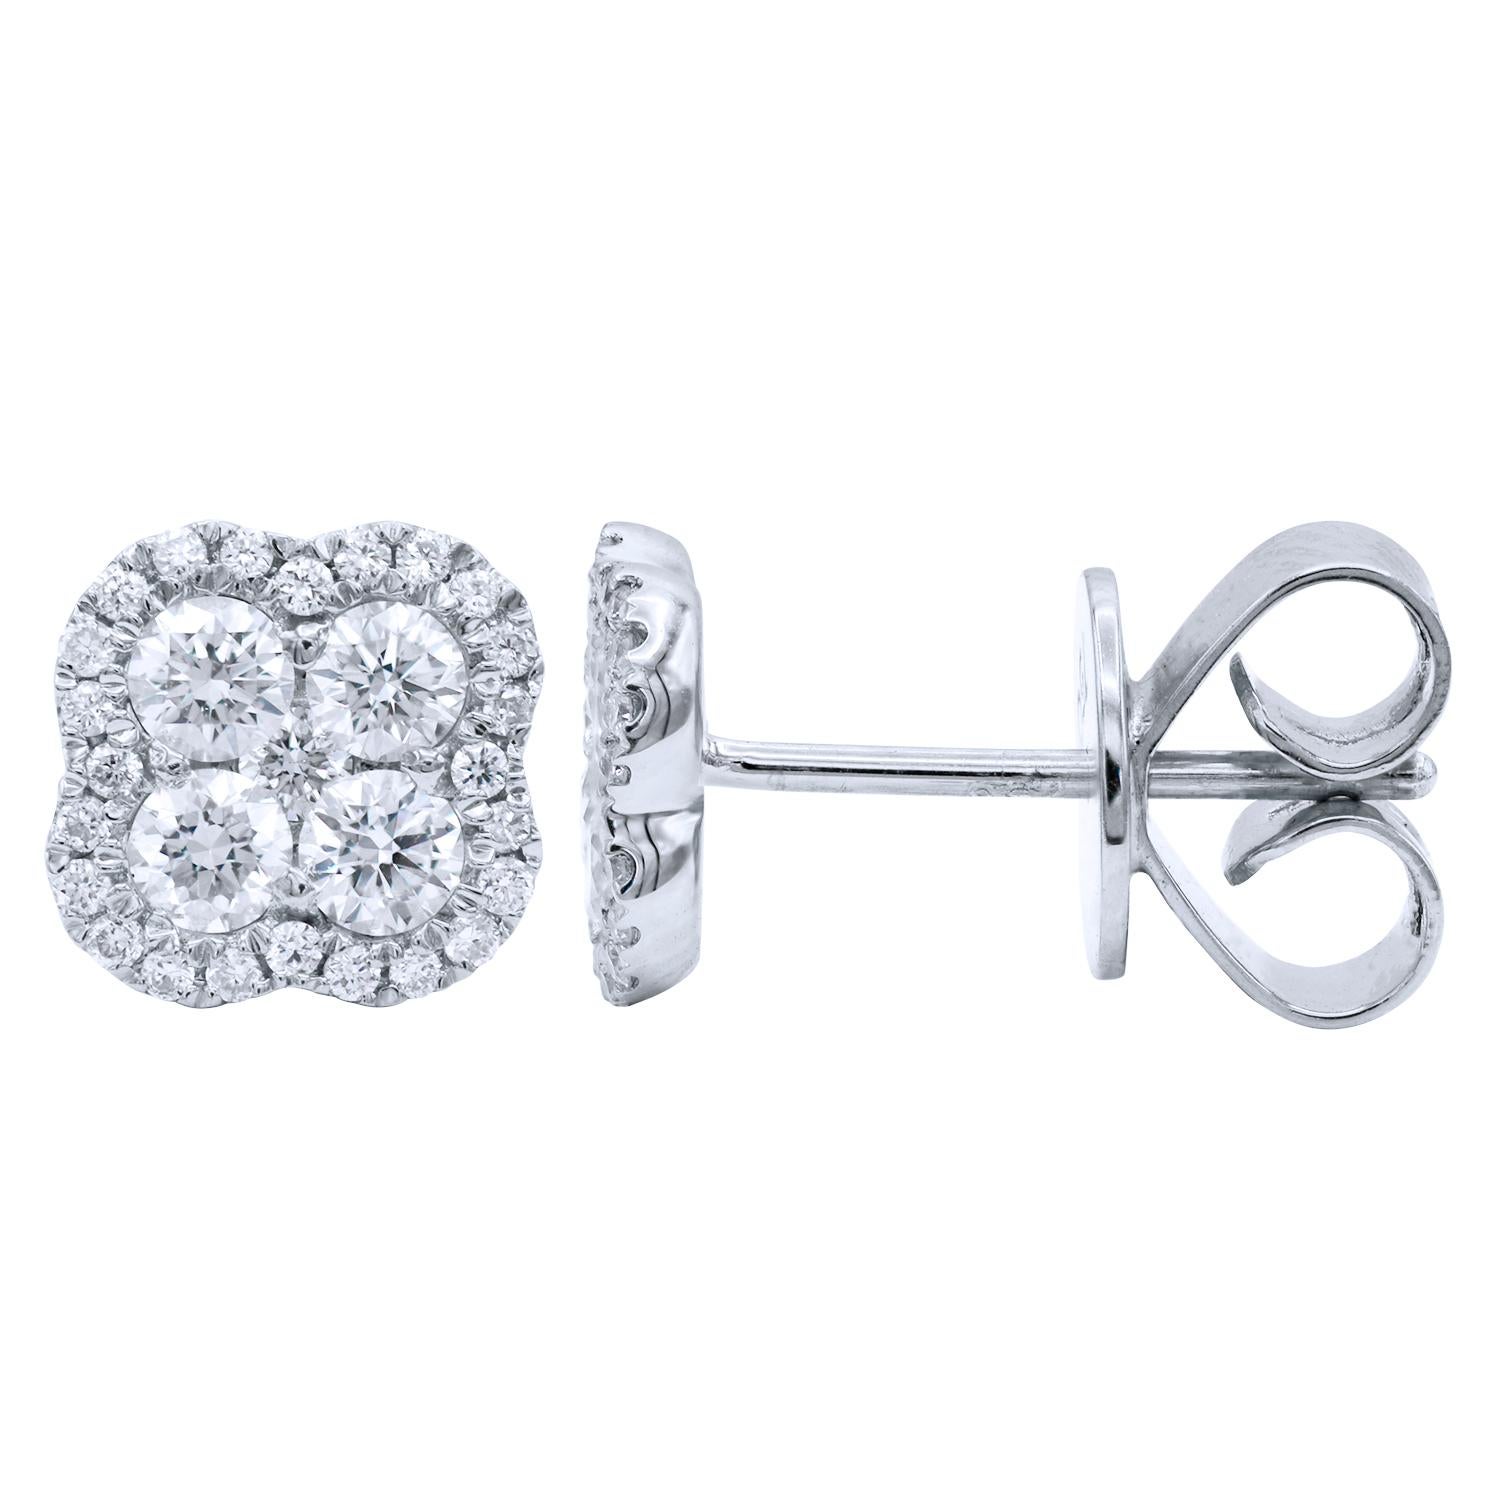 These beautiful earrings sparkle and shine with 58 round SI1-SI2, GH color diamonds totaling 0.46 carats. They contain 4 larger diamonds surrounded by smaller diamonds to create a beautiful cluster. They are set in 1.2 grams of 14 karat white gold